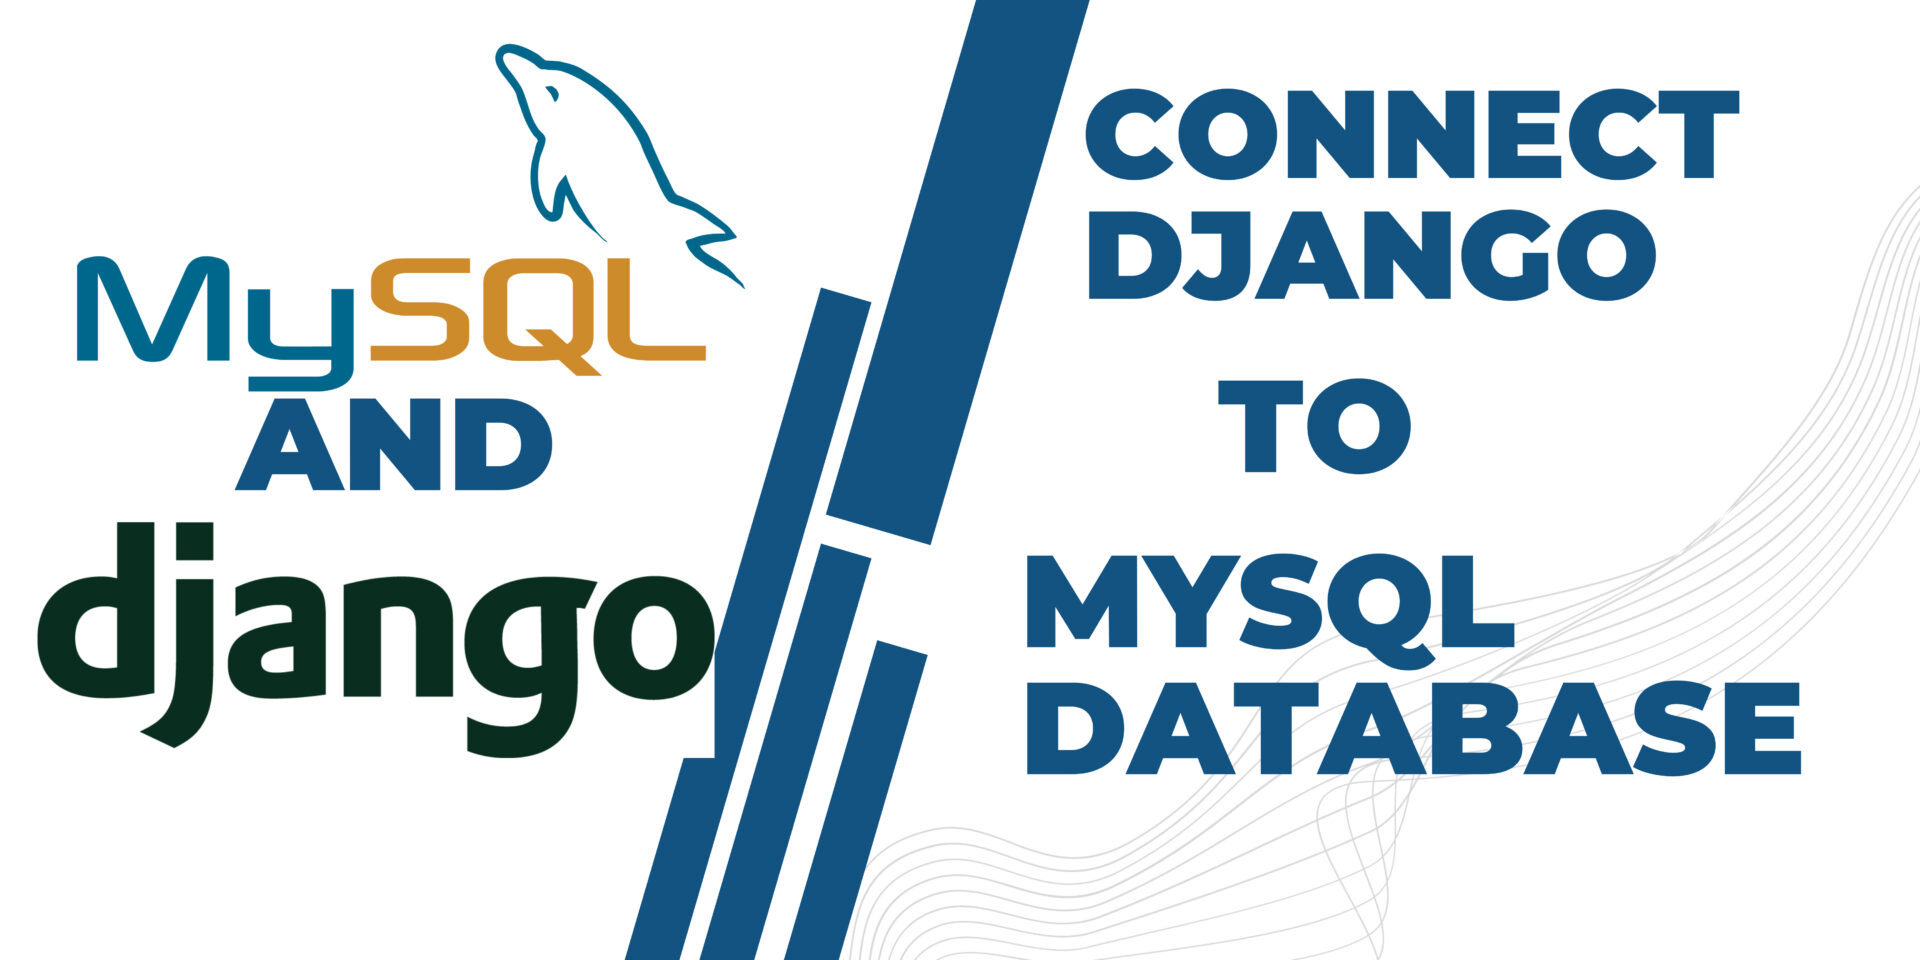 You are currently viewing How to Connect a Django Project to MySQL Database